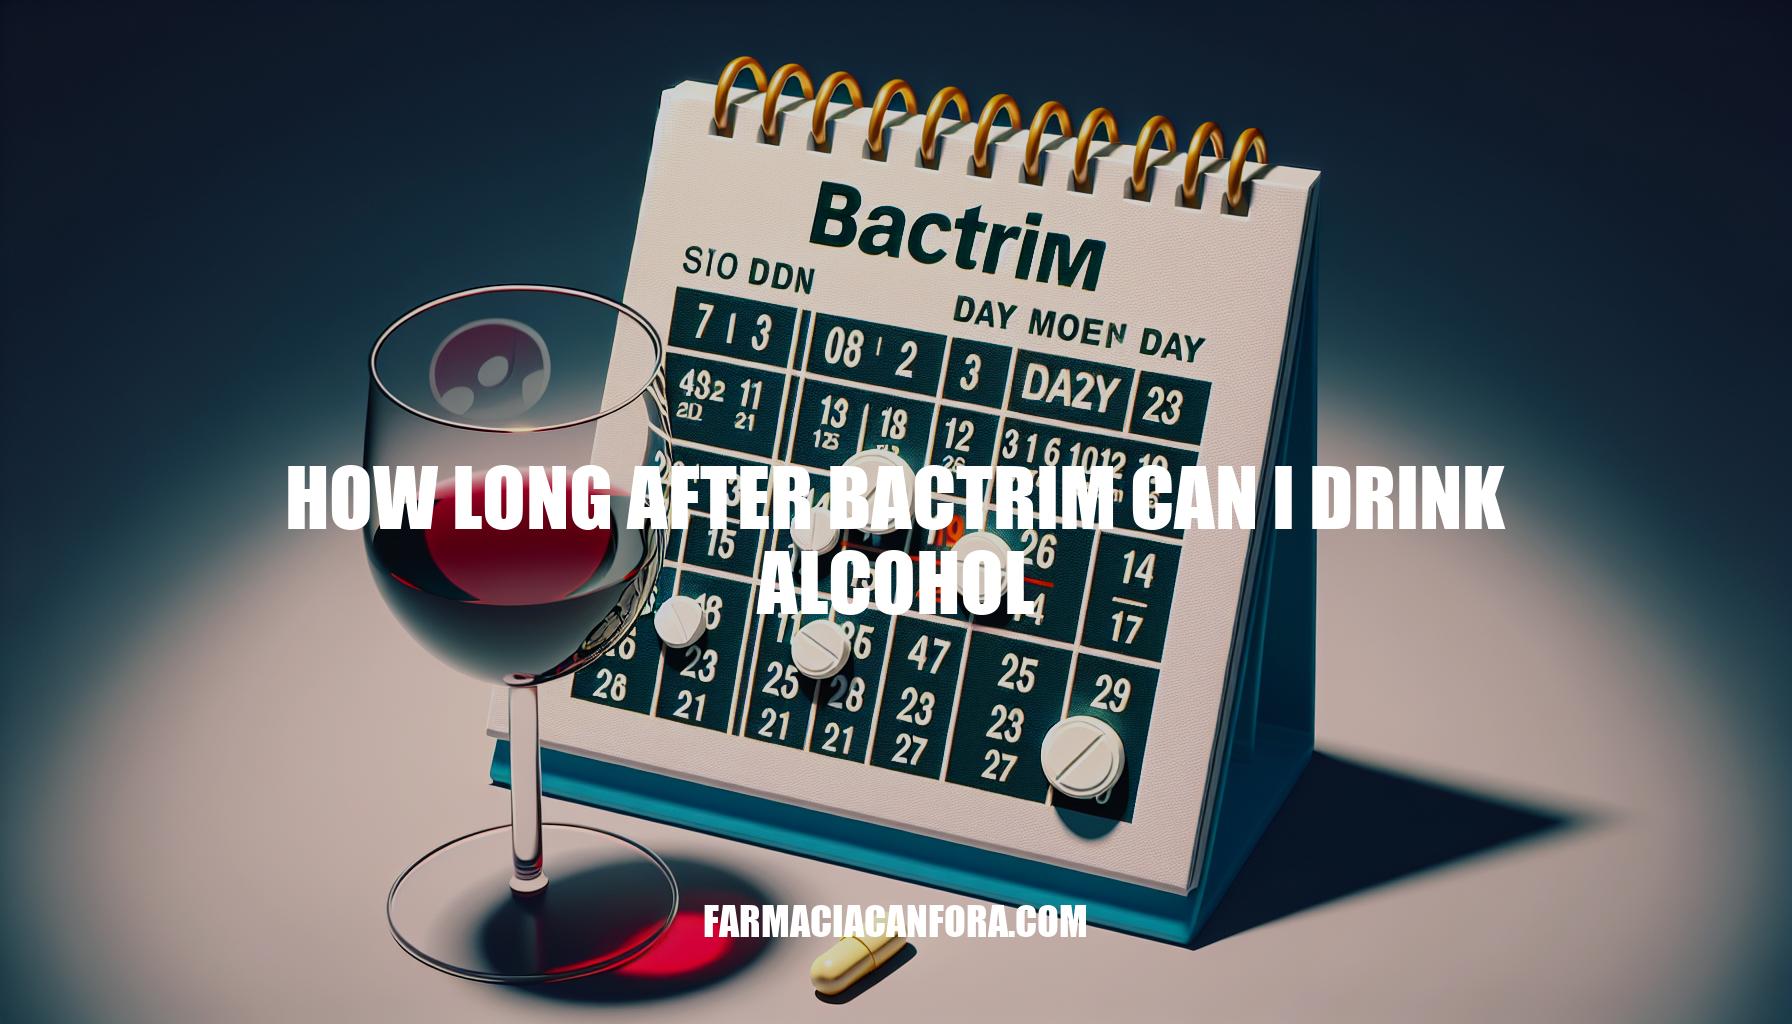 How Long After Bactrim Can I Drink Alcohol